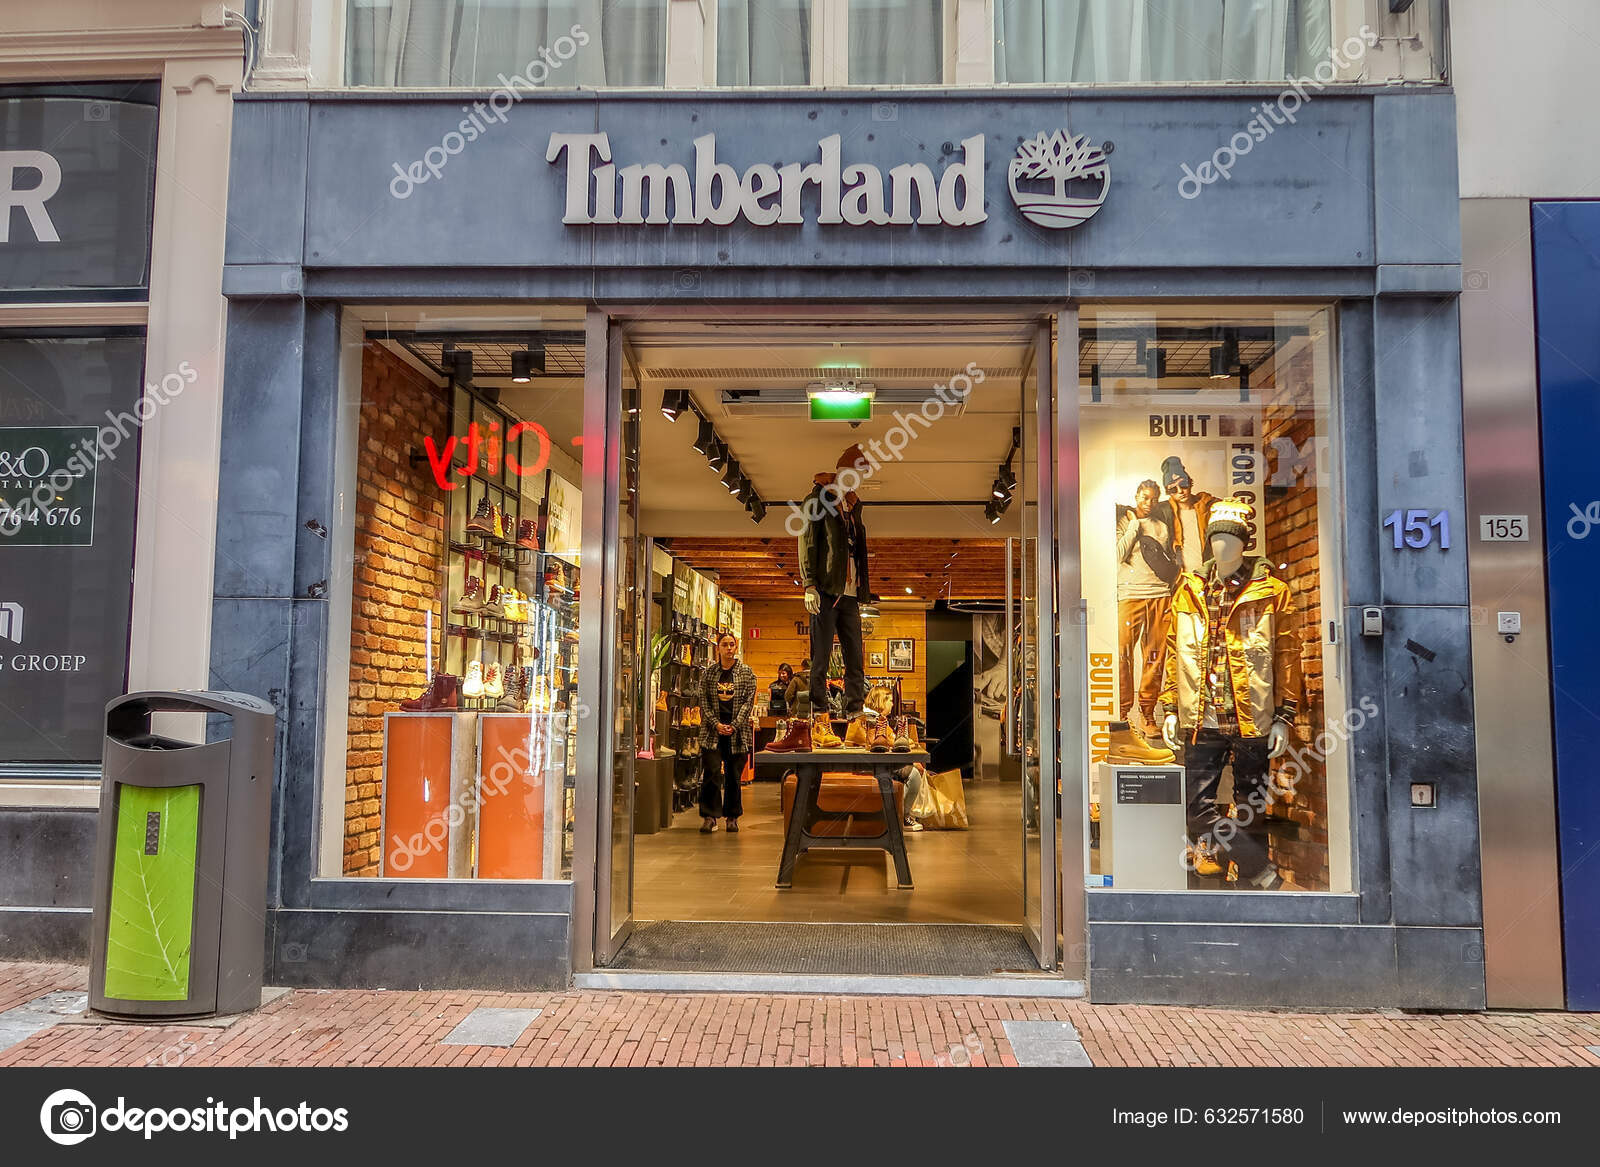 Commercial timberland Stock Photos, Royalty Free Commercial timberland  Images | Depositphotos